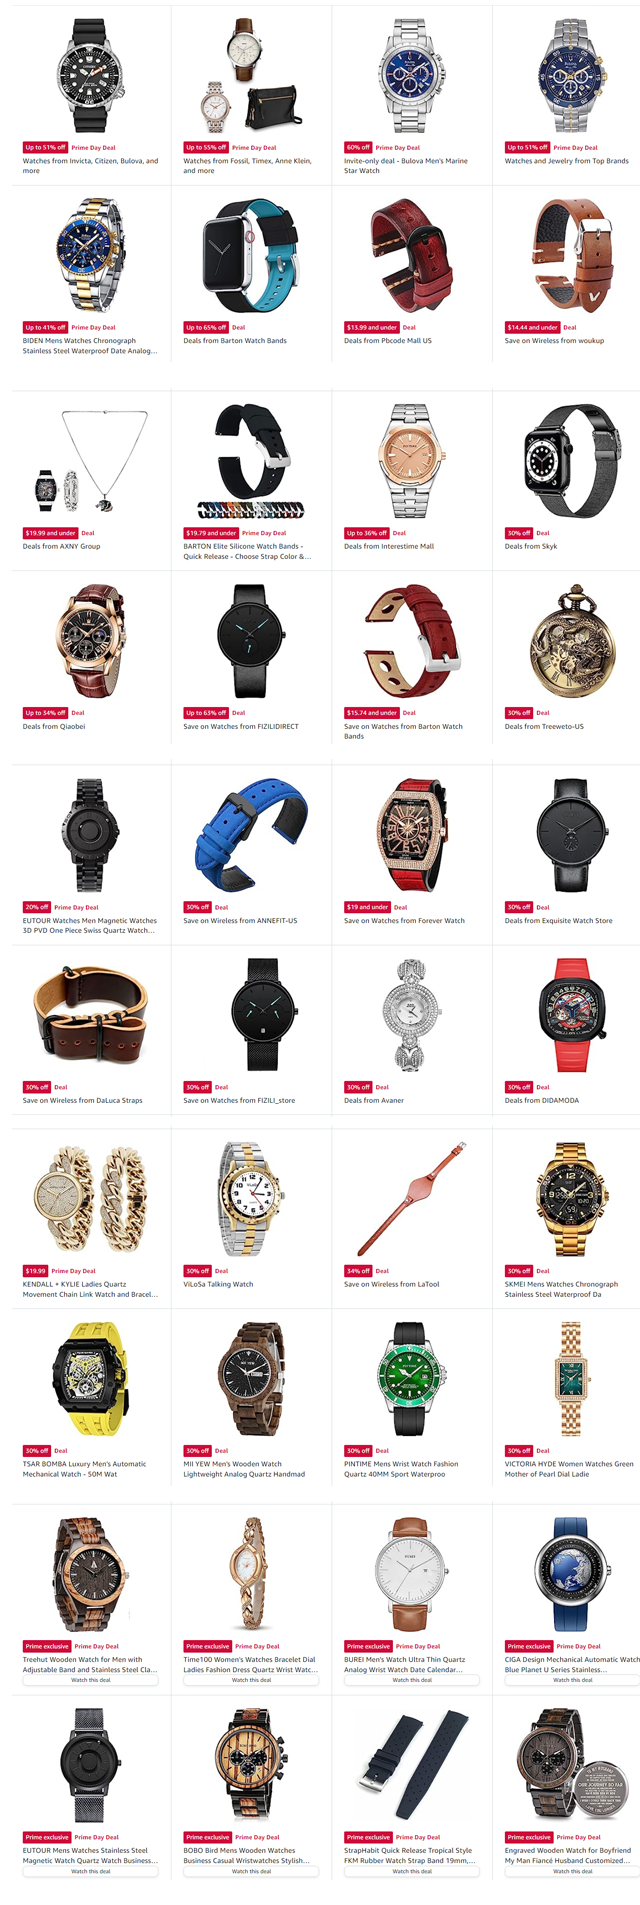 prime day deals on wrist watches